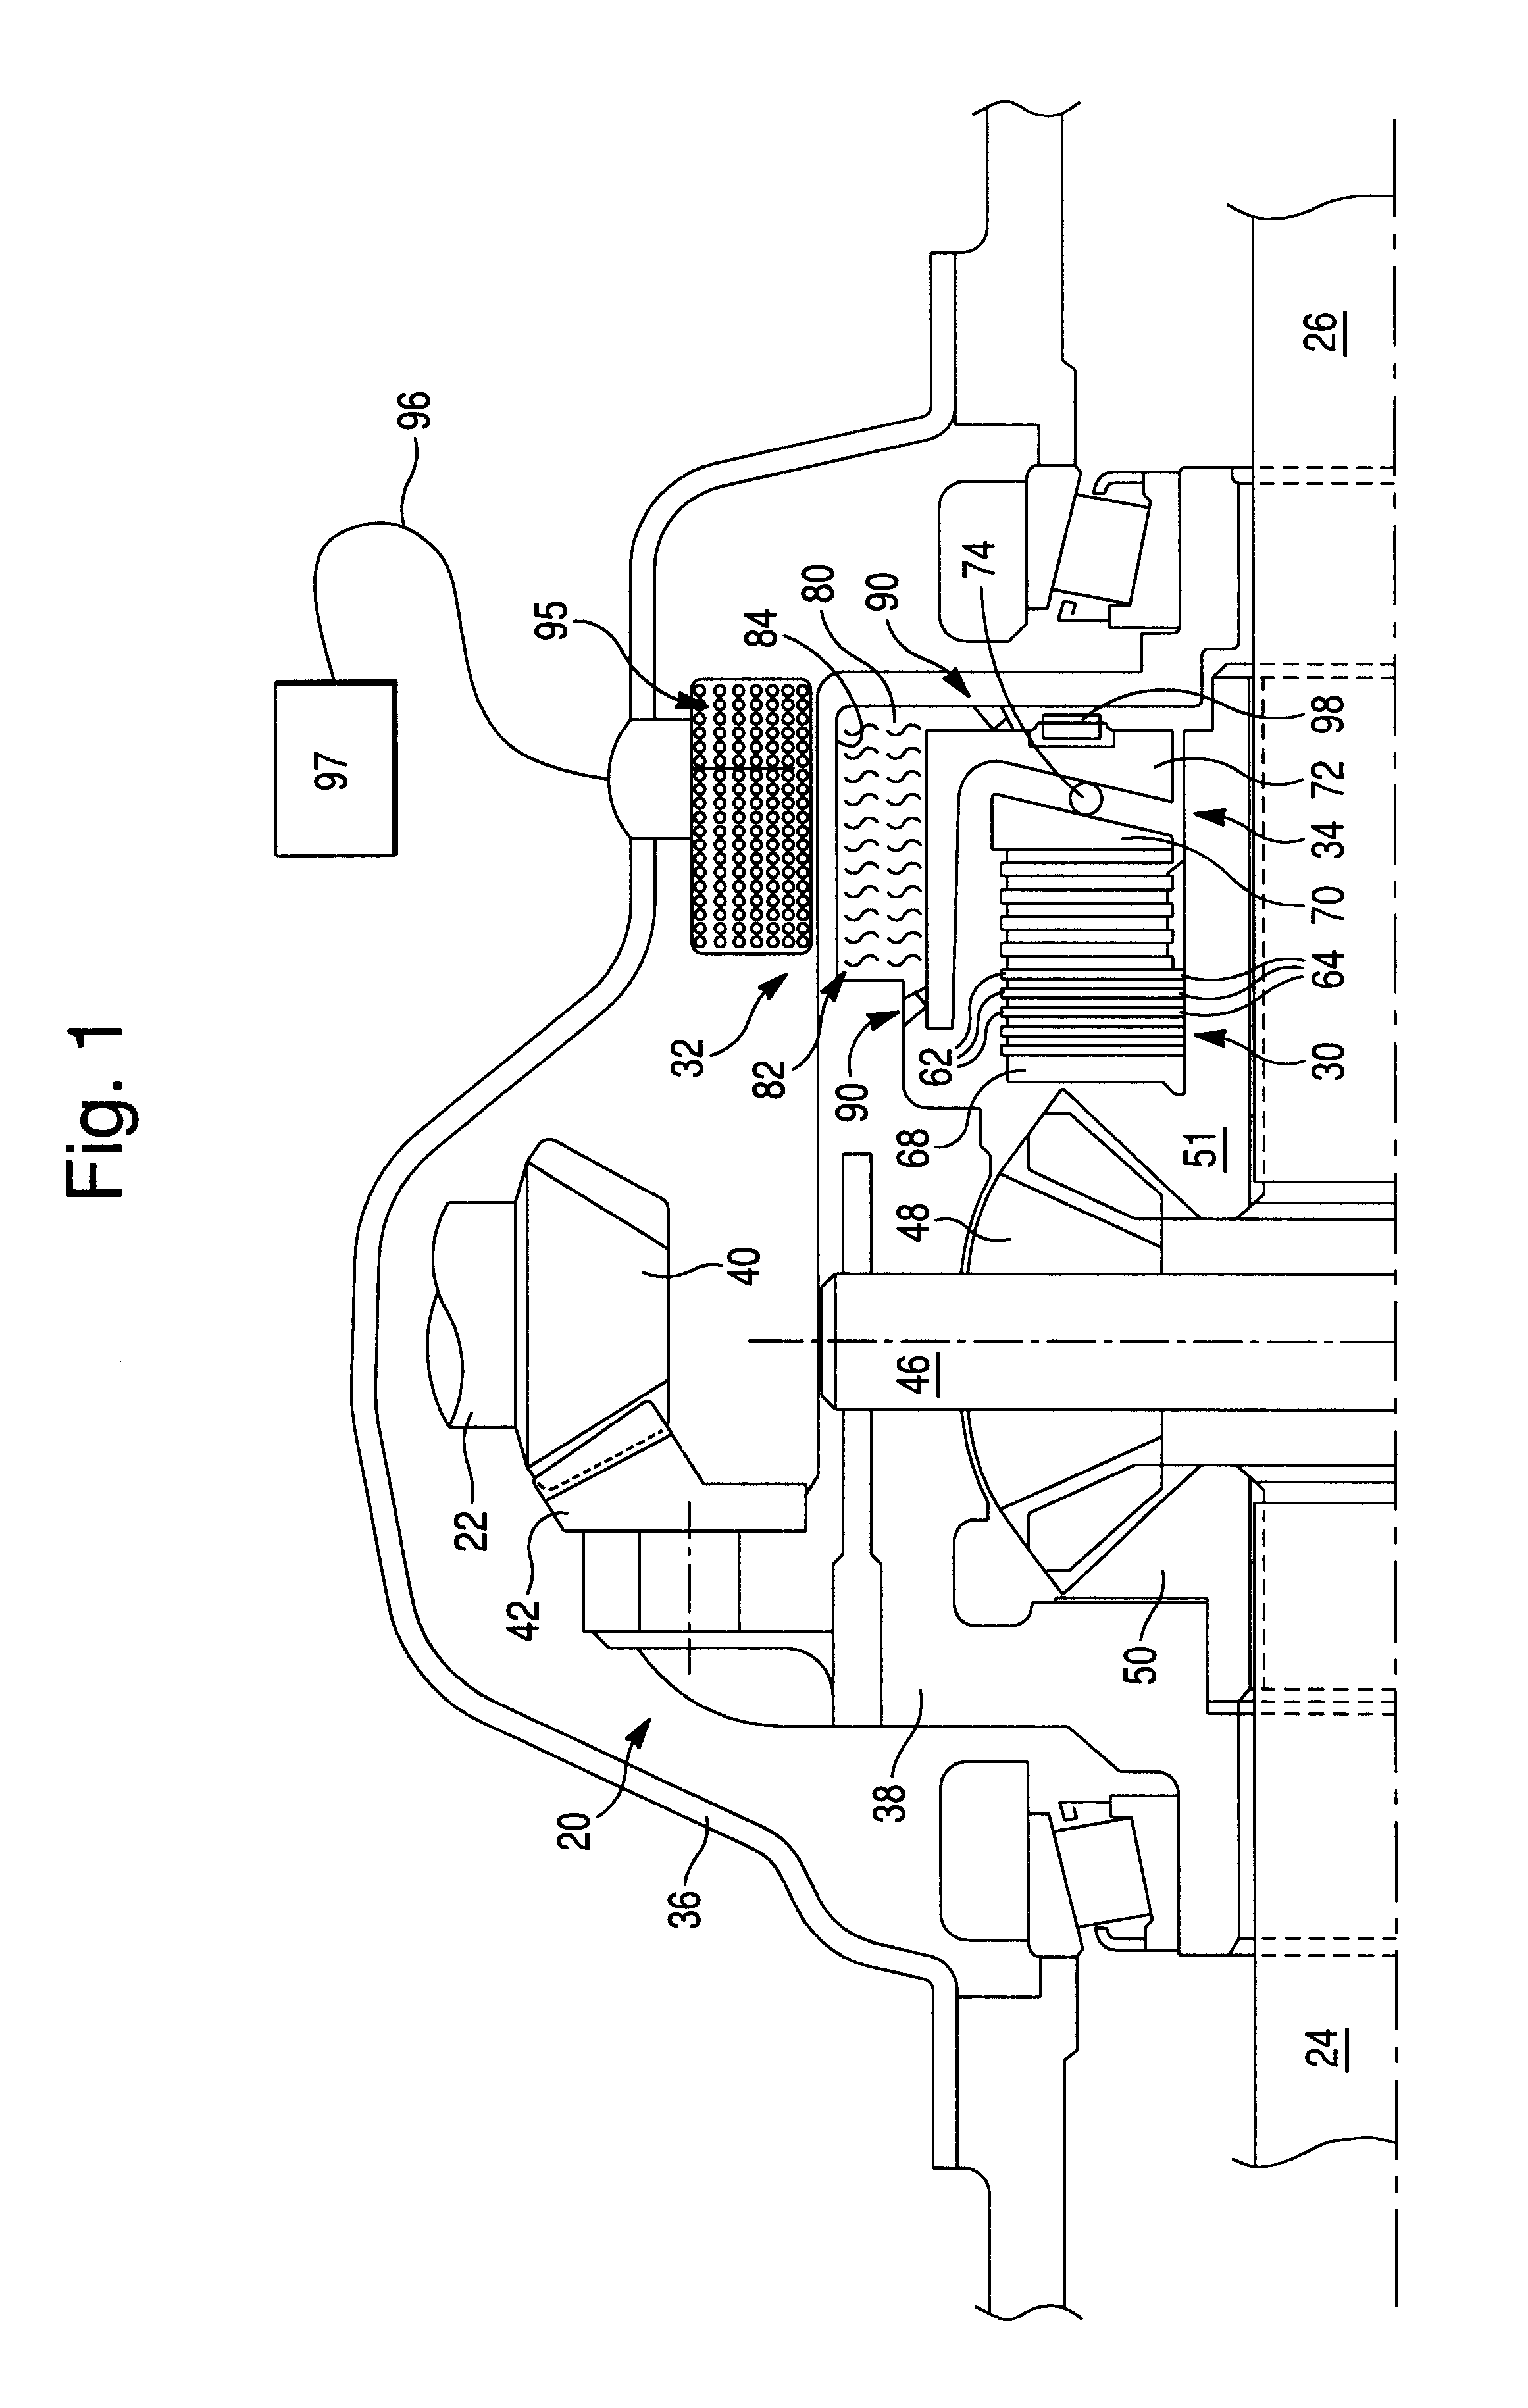 Locking differential with clutch activated by magnetorheological fluid